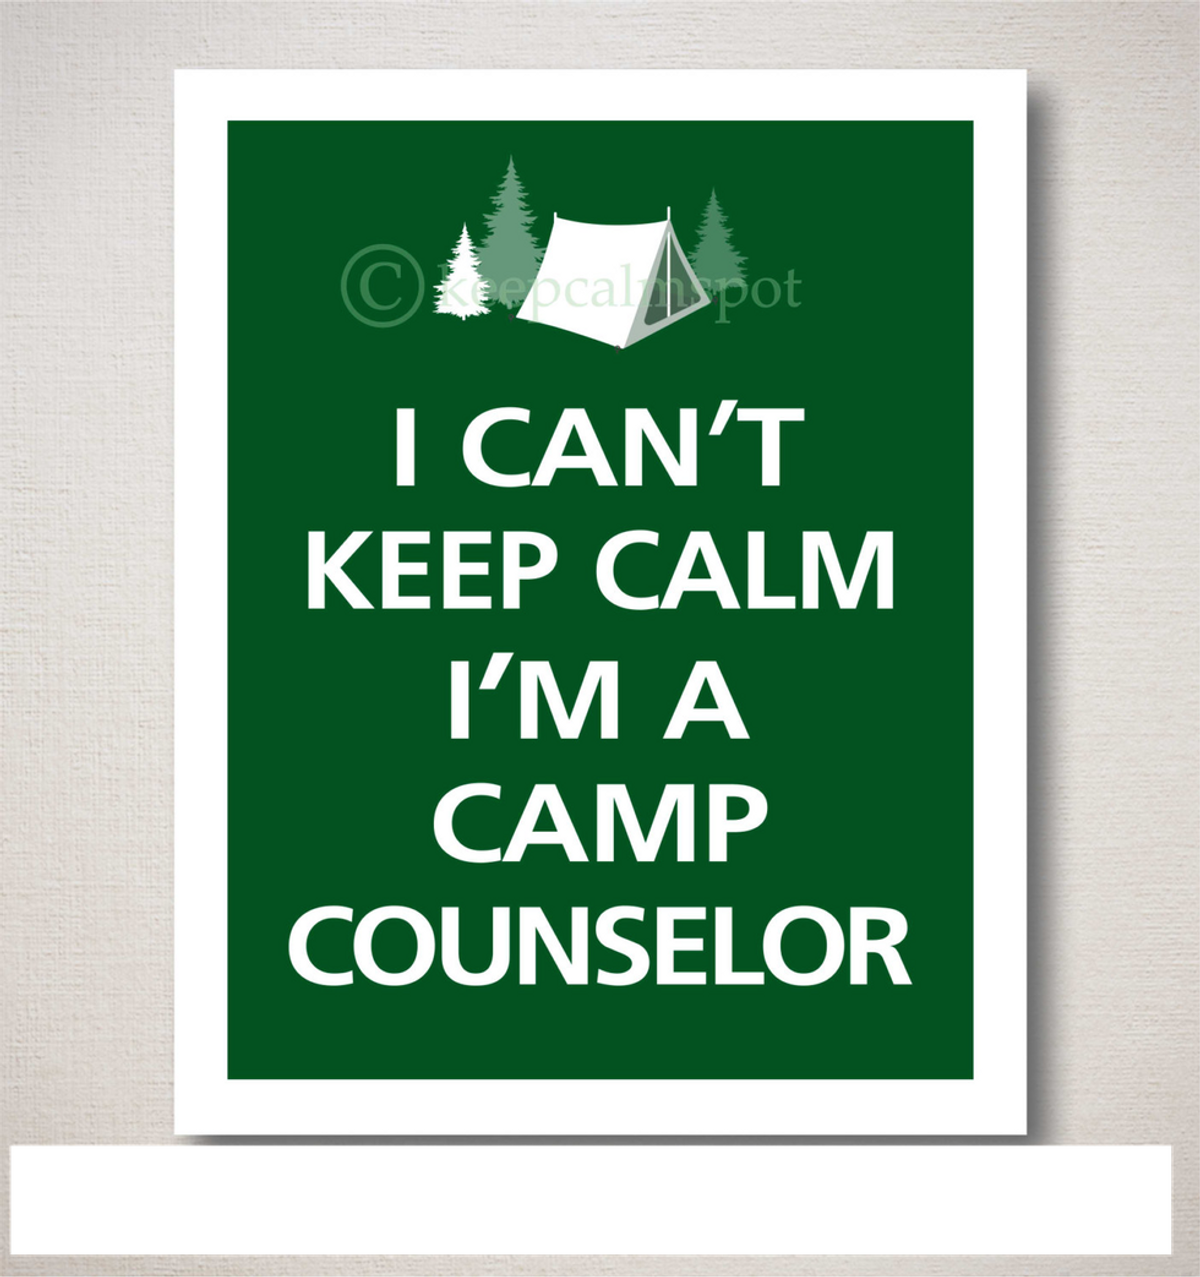 54 Thoughts a Day Camp Counselor has